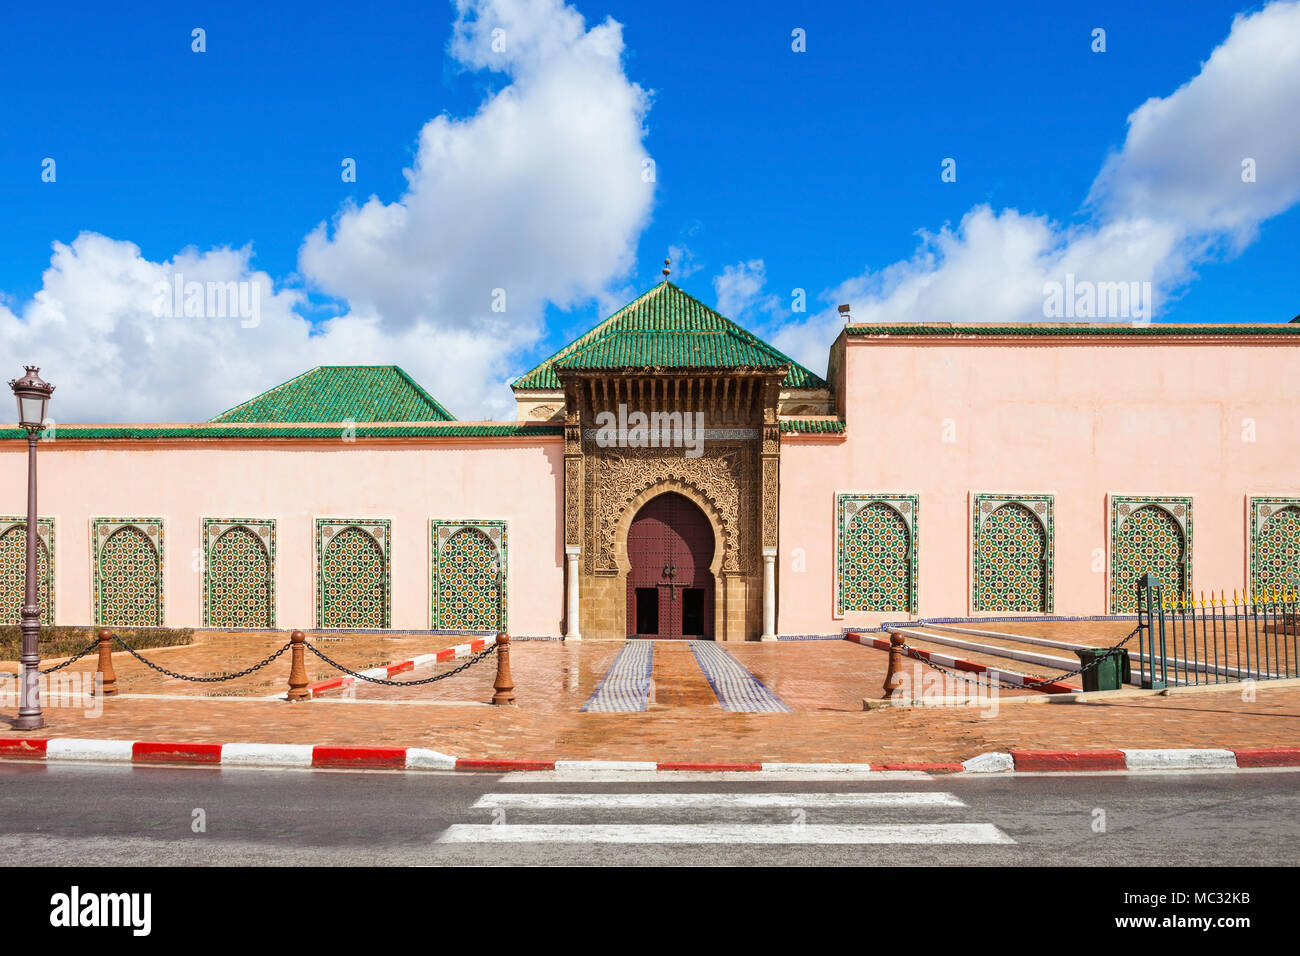 The Mausoleum of Moulay Ismail in Meknes in Morocco. Mausoleum of Moulay Ismail is a tomb and mosque located in the Morocco city of Meknes. Stock Photo